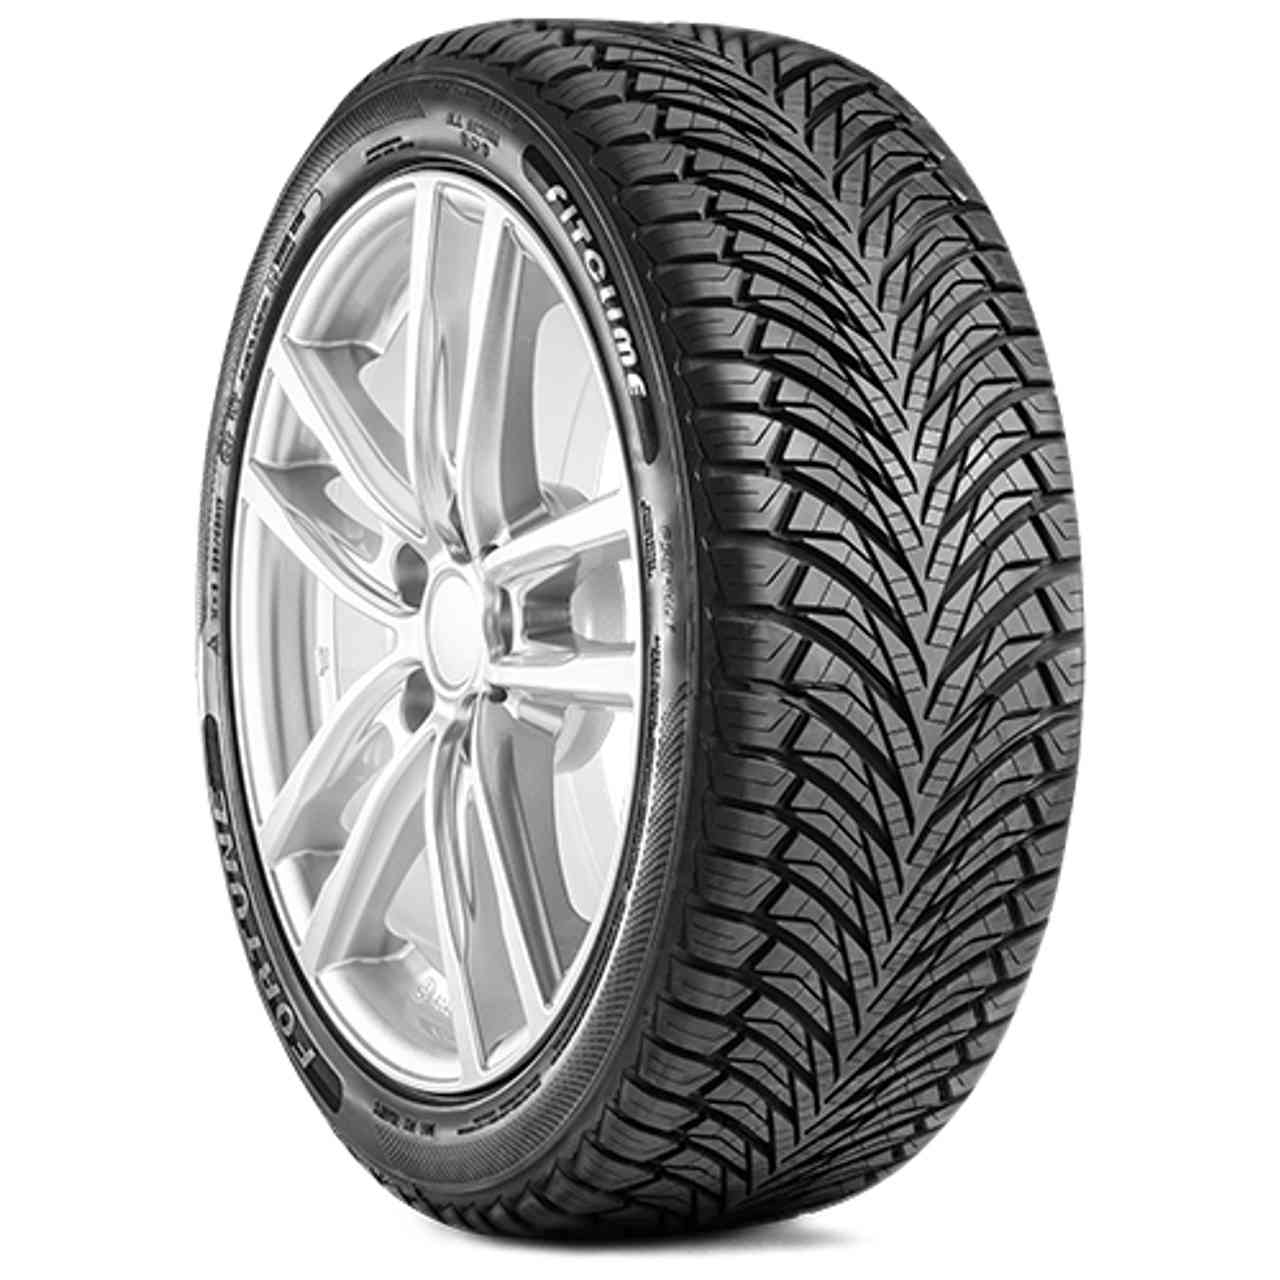 FORTUNE FITCLIME FSR-401 155/70R13 75T BSW